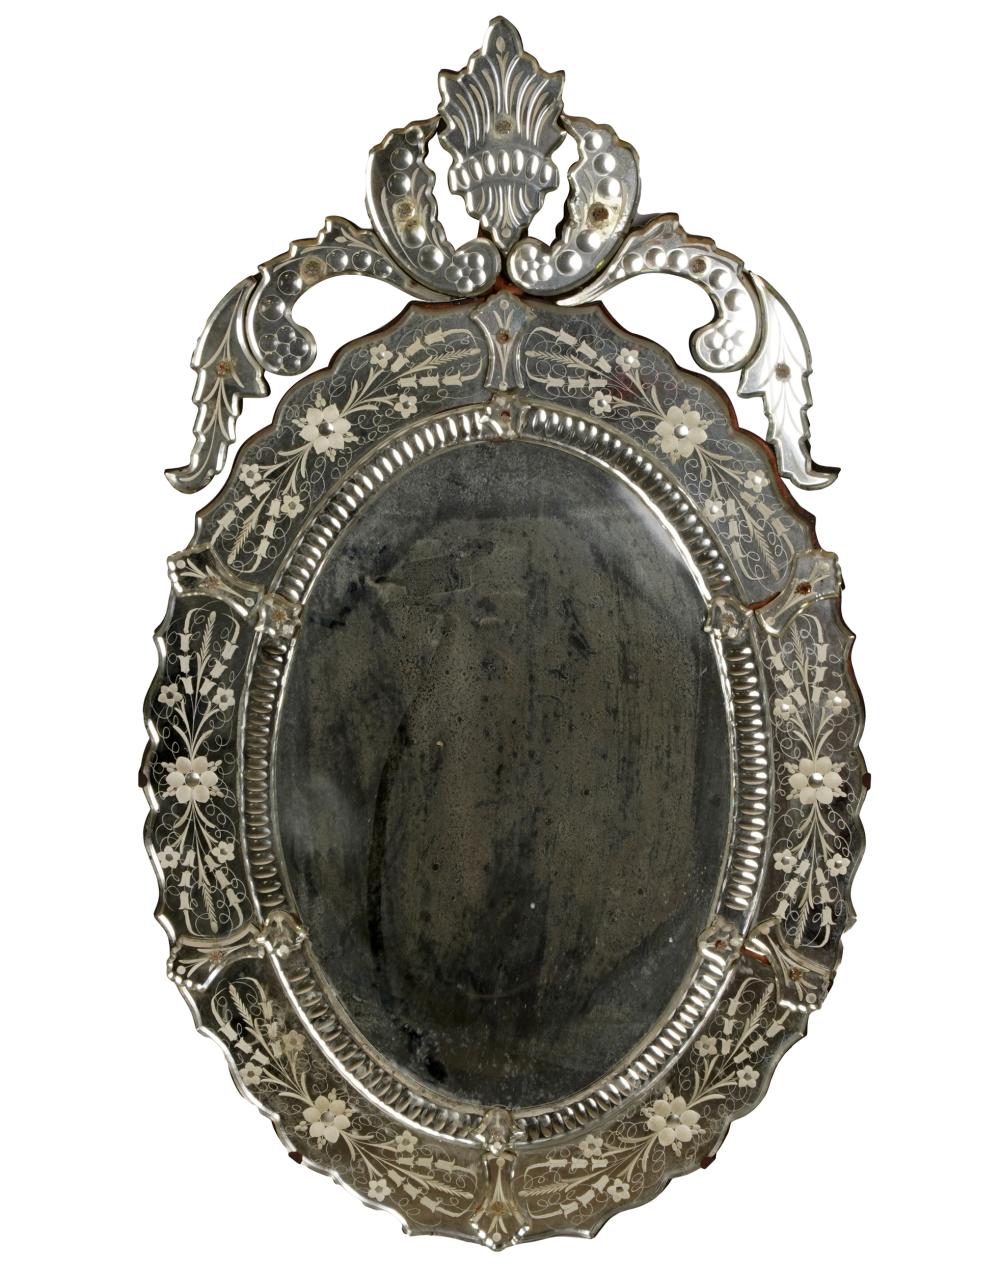 VENETIAN ETCHED GLASS MIRRORwith